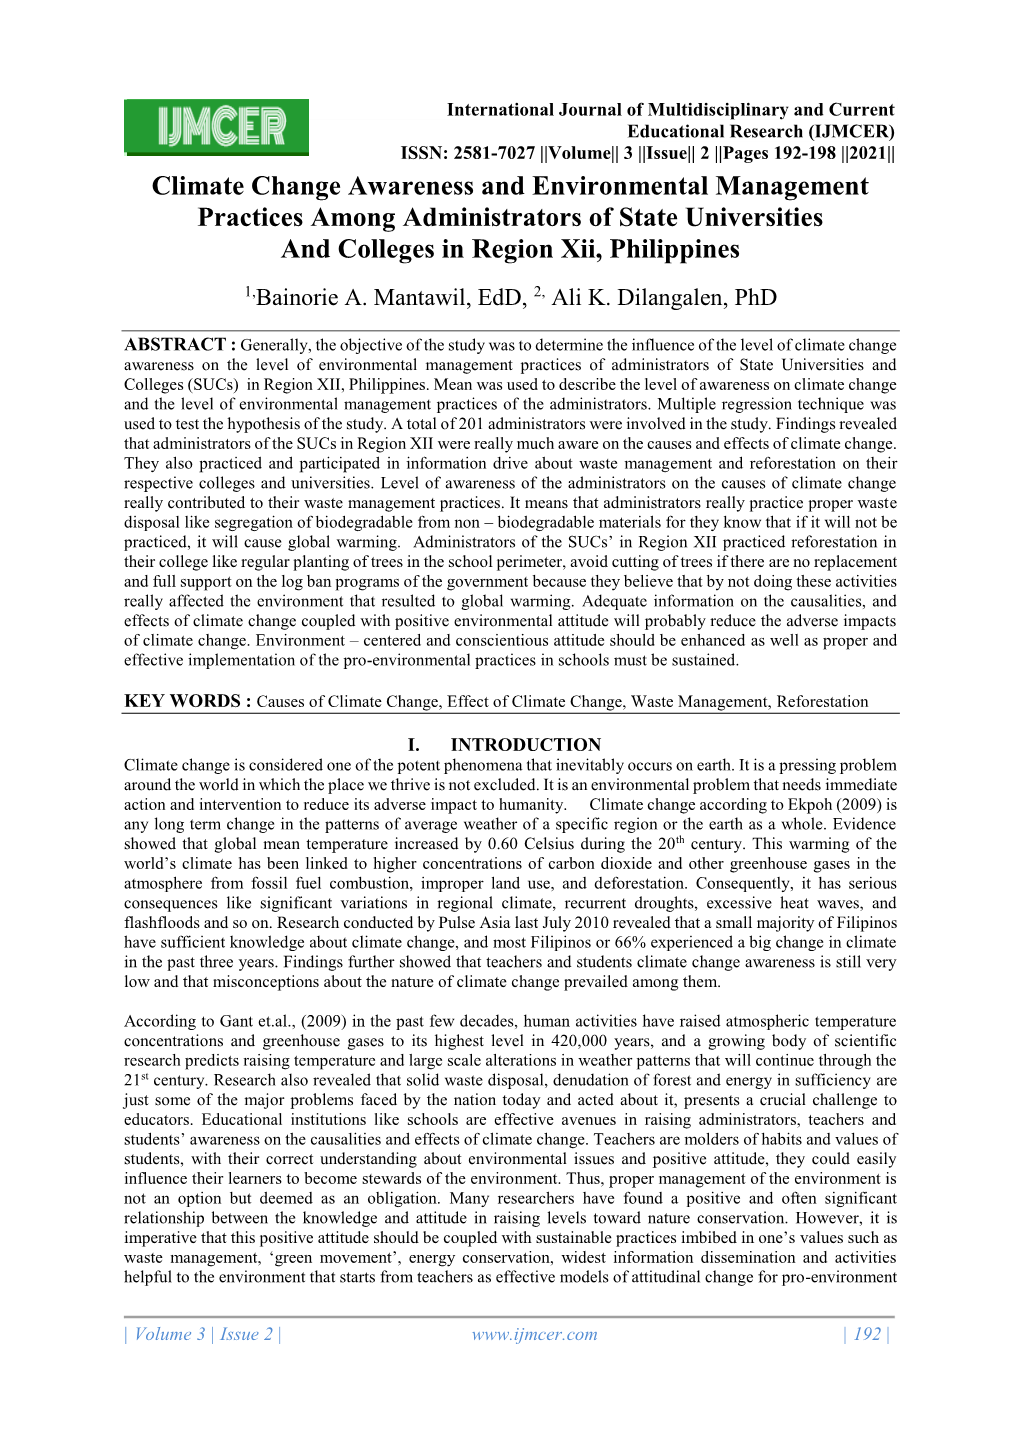 Climate Change Awareness and Environmental Management Practices Among Administrators of State Universities and Colleges in Region Xii, Philippines